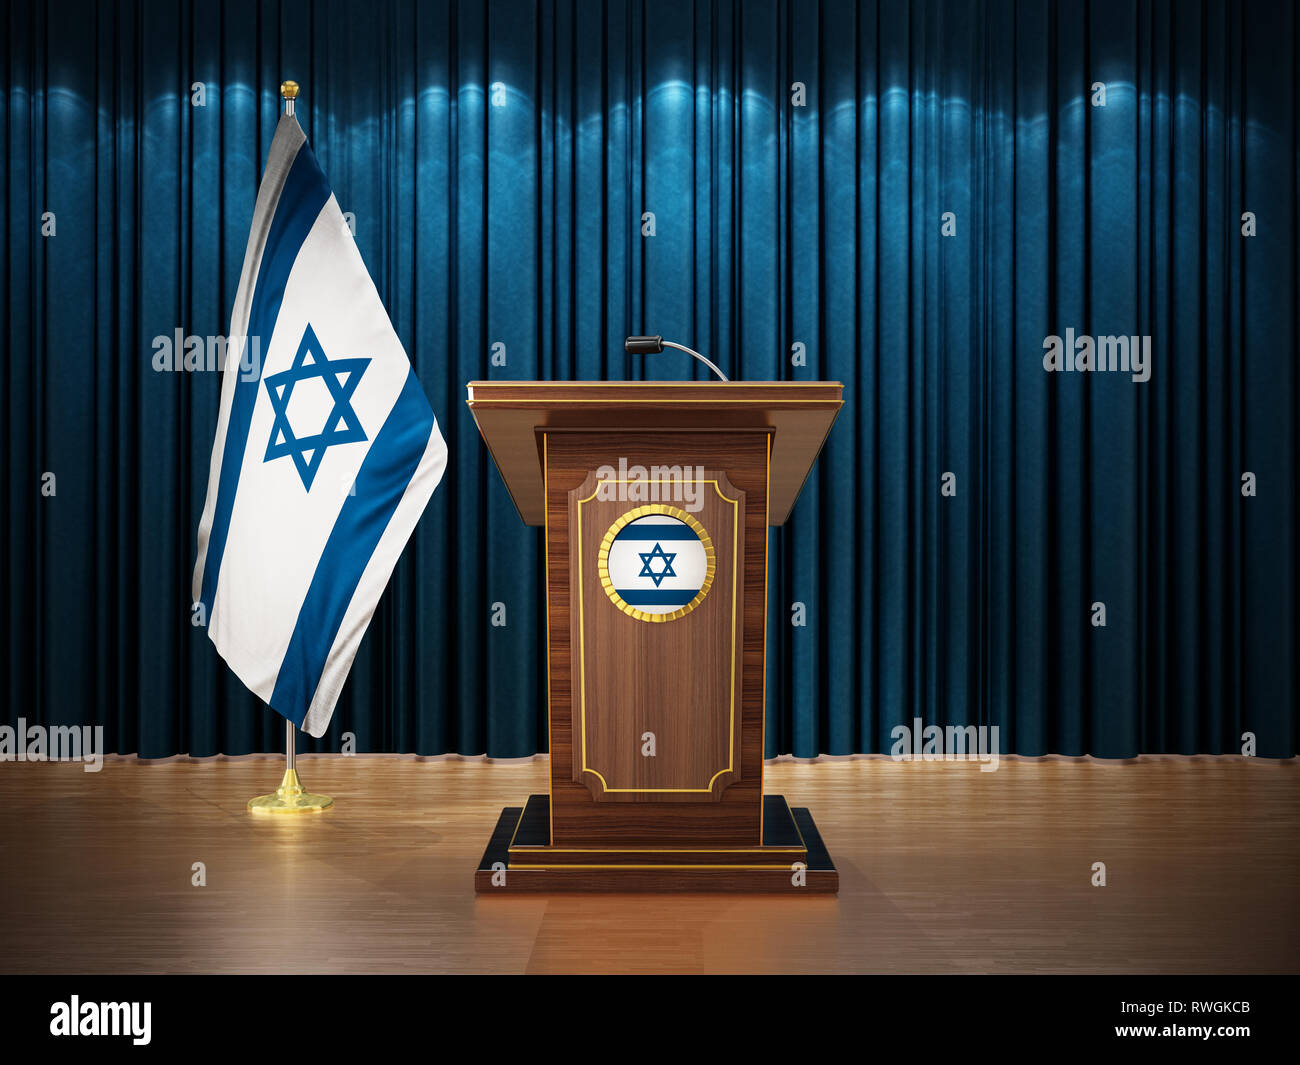 Press conference with flags of Israel and lectern against the blue curtain. 3D illustration. Stock Photo